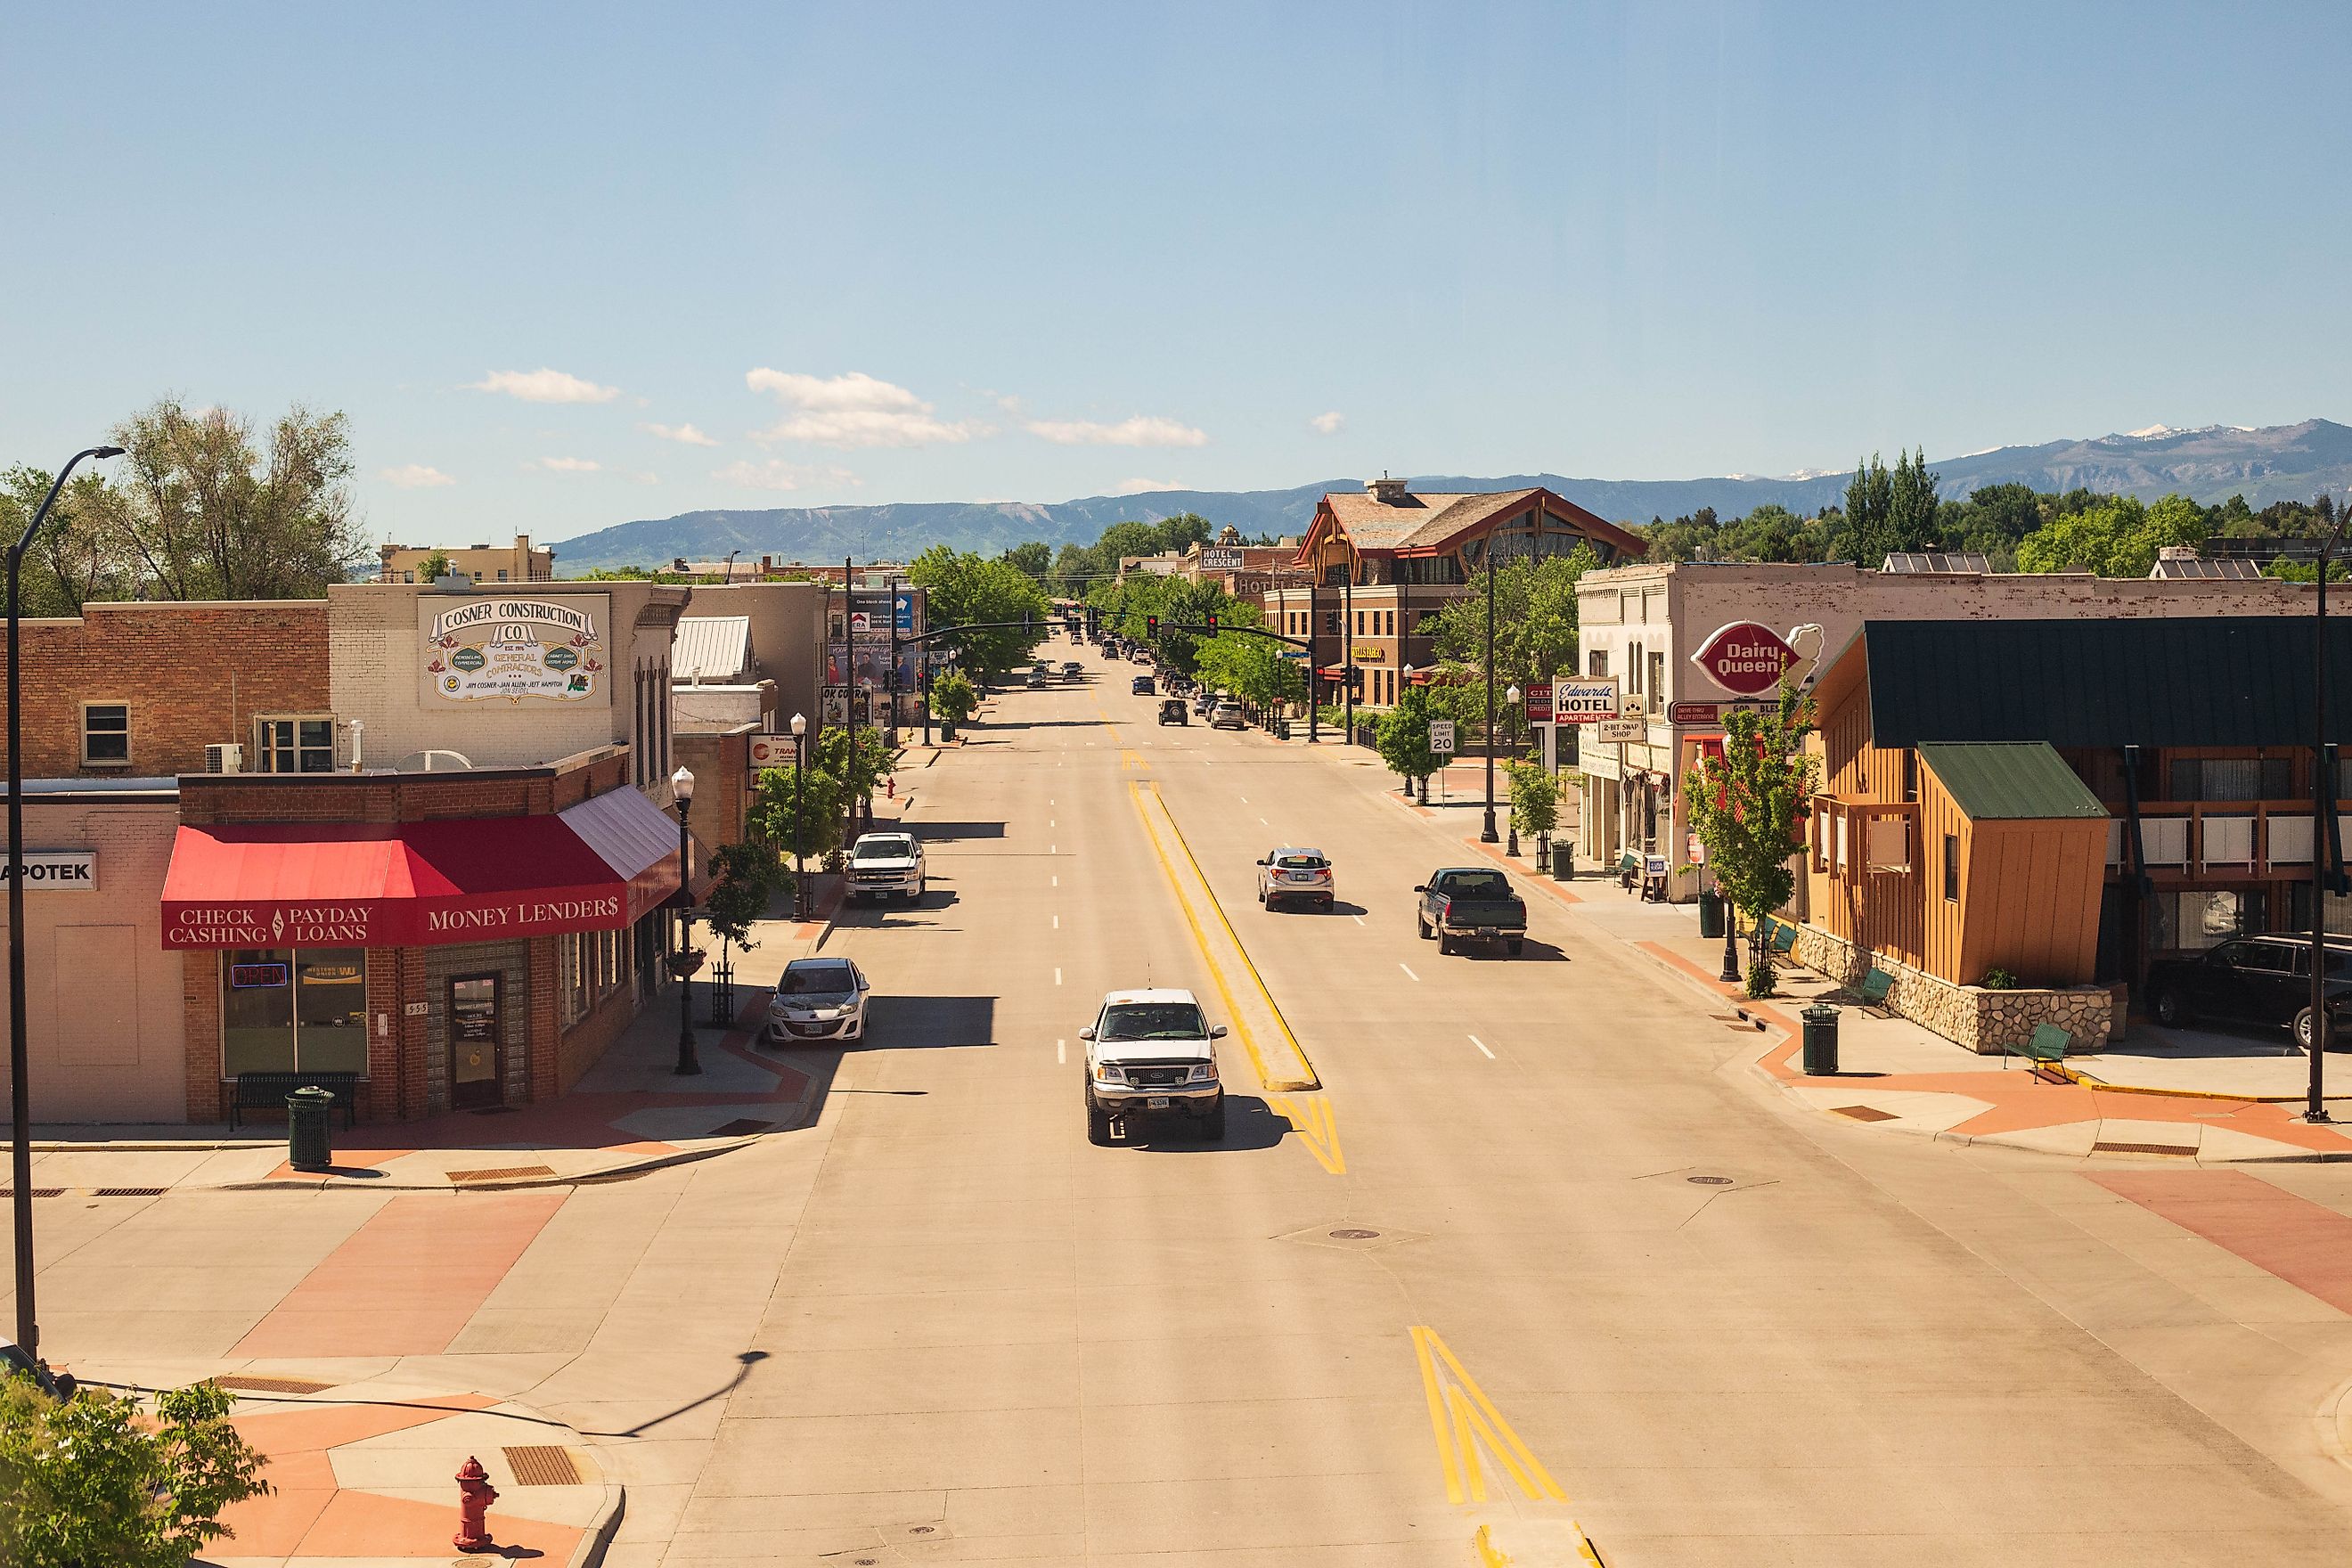 View of Main Street in Sheridan, Wyoming, USA. Editorial credit: Ems Images / Shutterstock.com